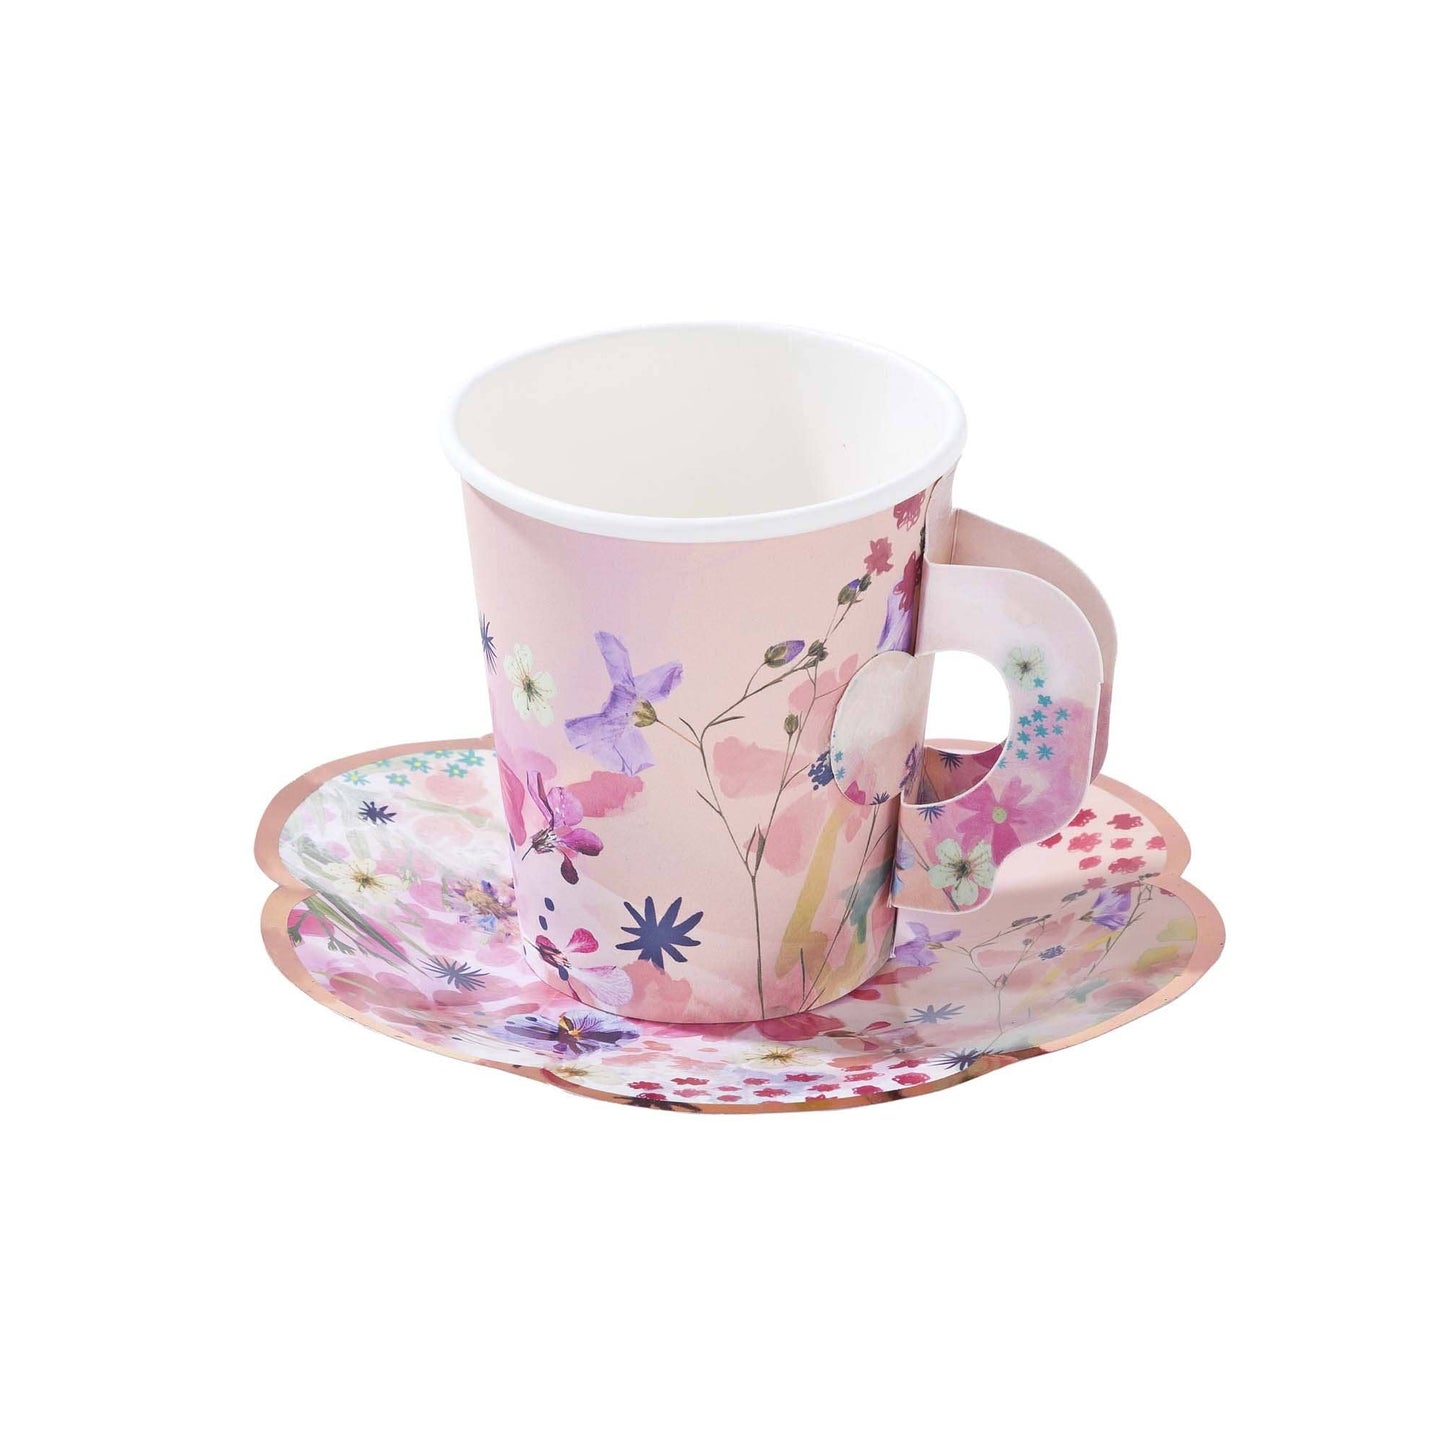 Blossom Girls Cup and Saucer Set - Lemonade Party Box